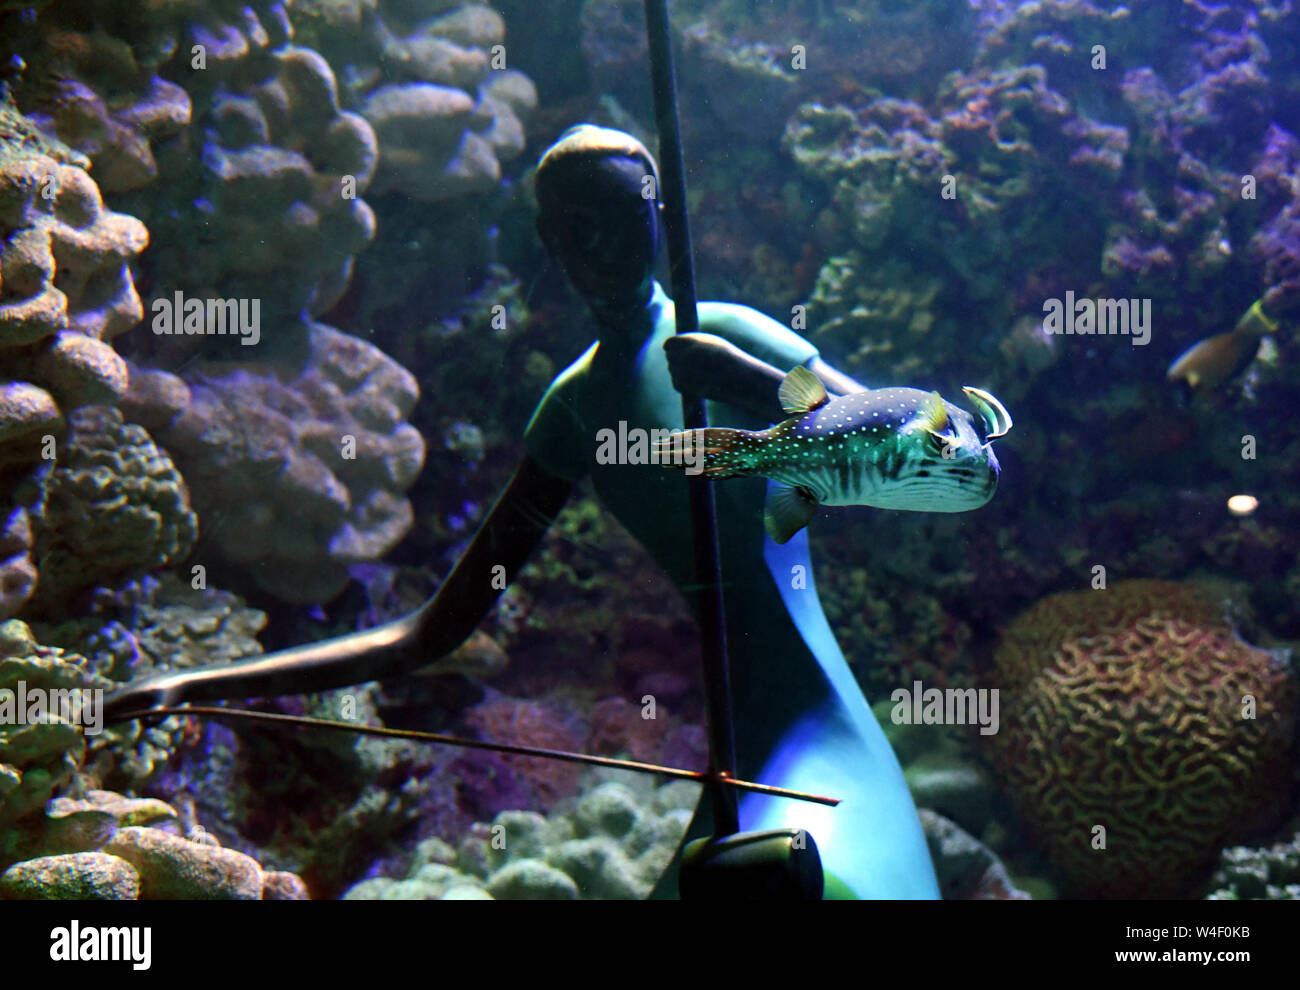 Qingdao. 22nd July, 2019. Photo taken on July 22, 2019 shows a statue in the shape of folk music performer in an aquarium of an ocean park in Qingdao, east China's Shandong Province. A dozen statues showing various Chinese folk music playing scenes are installed underwater in aquariums at the ocean park, which provides a fresh audio-visual enjoyment to visitors amid melodious folk music. Credit: Li Ziheng/Xinhua/Alamy Live News Stock Photo